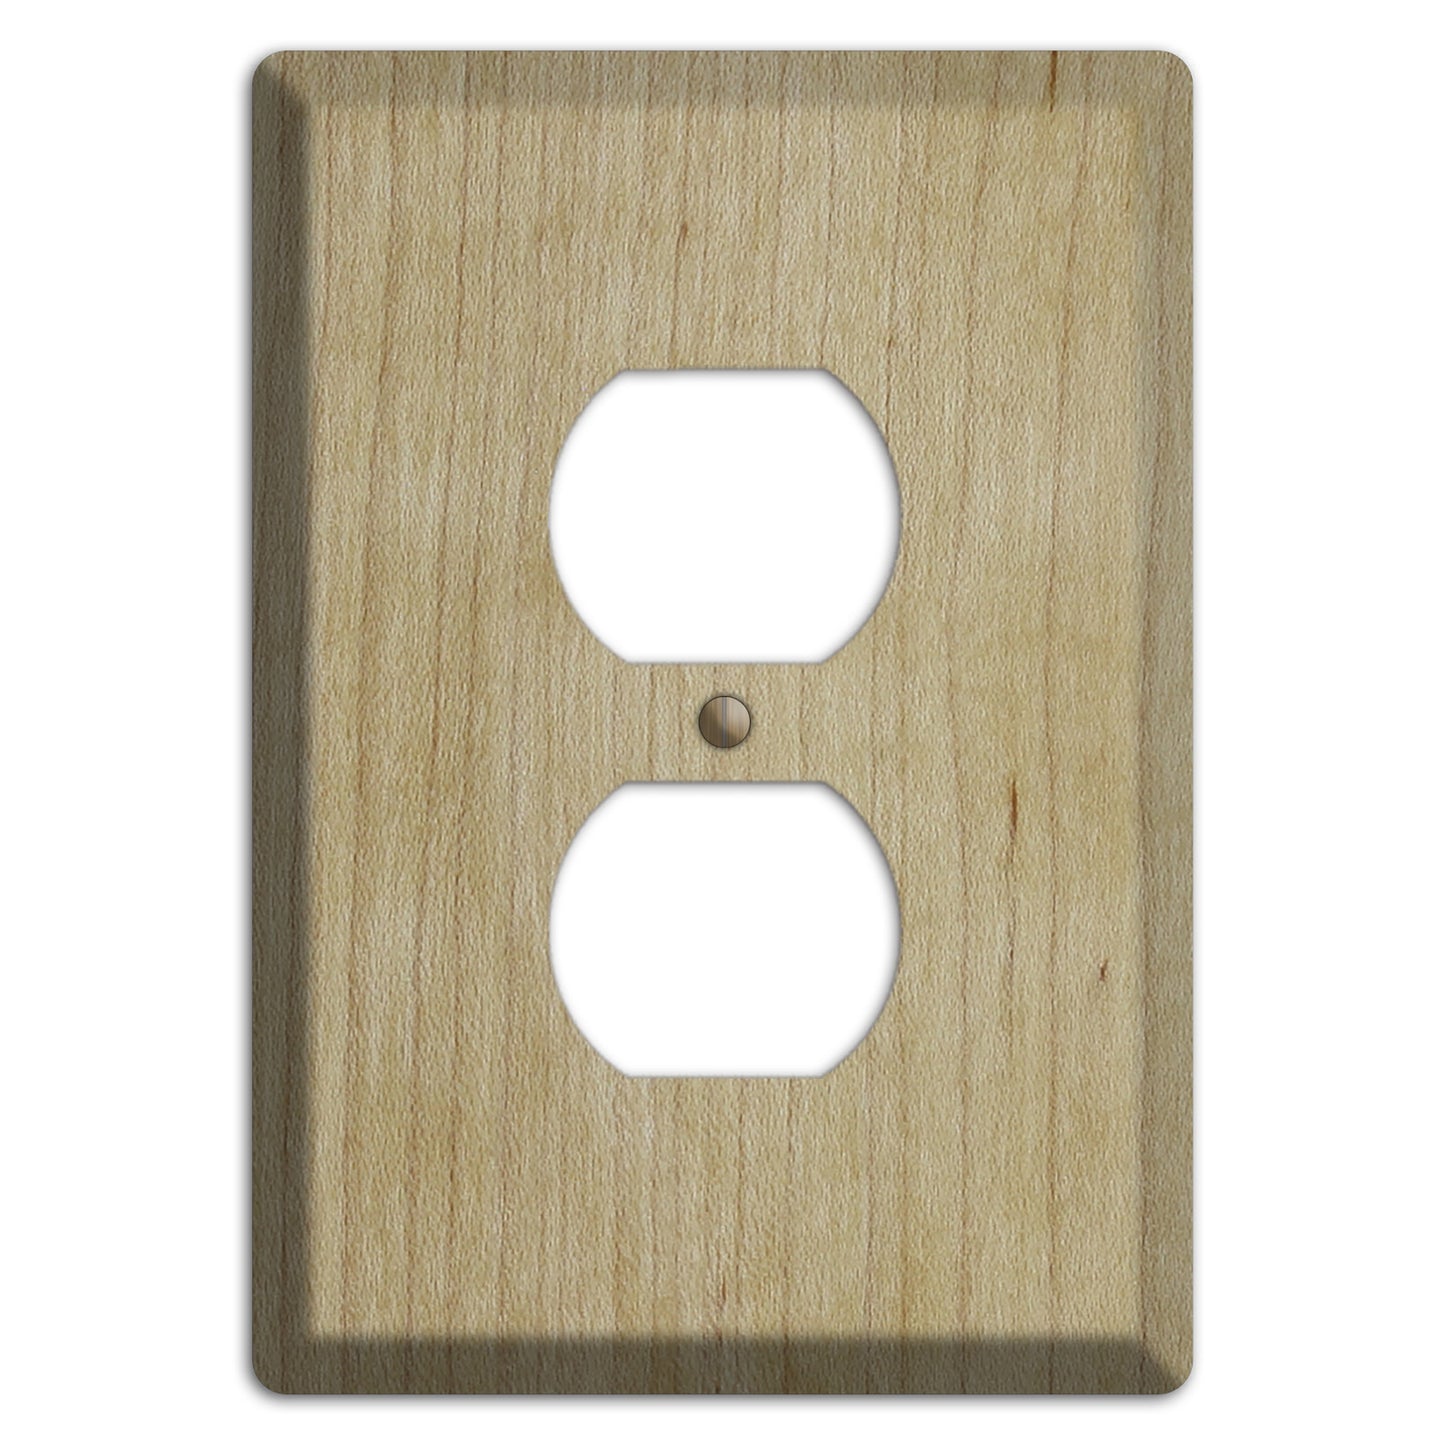 Unfinished Maple Wood Duplex Outlet Cover Plate